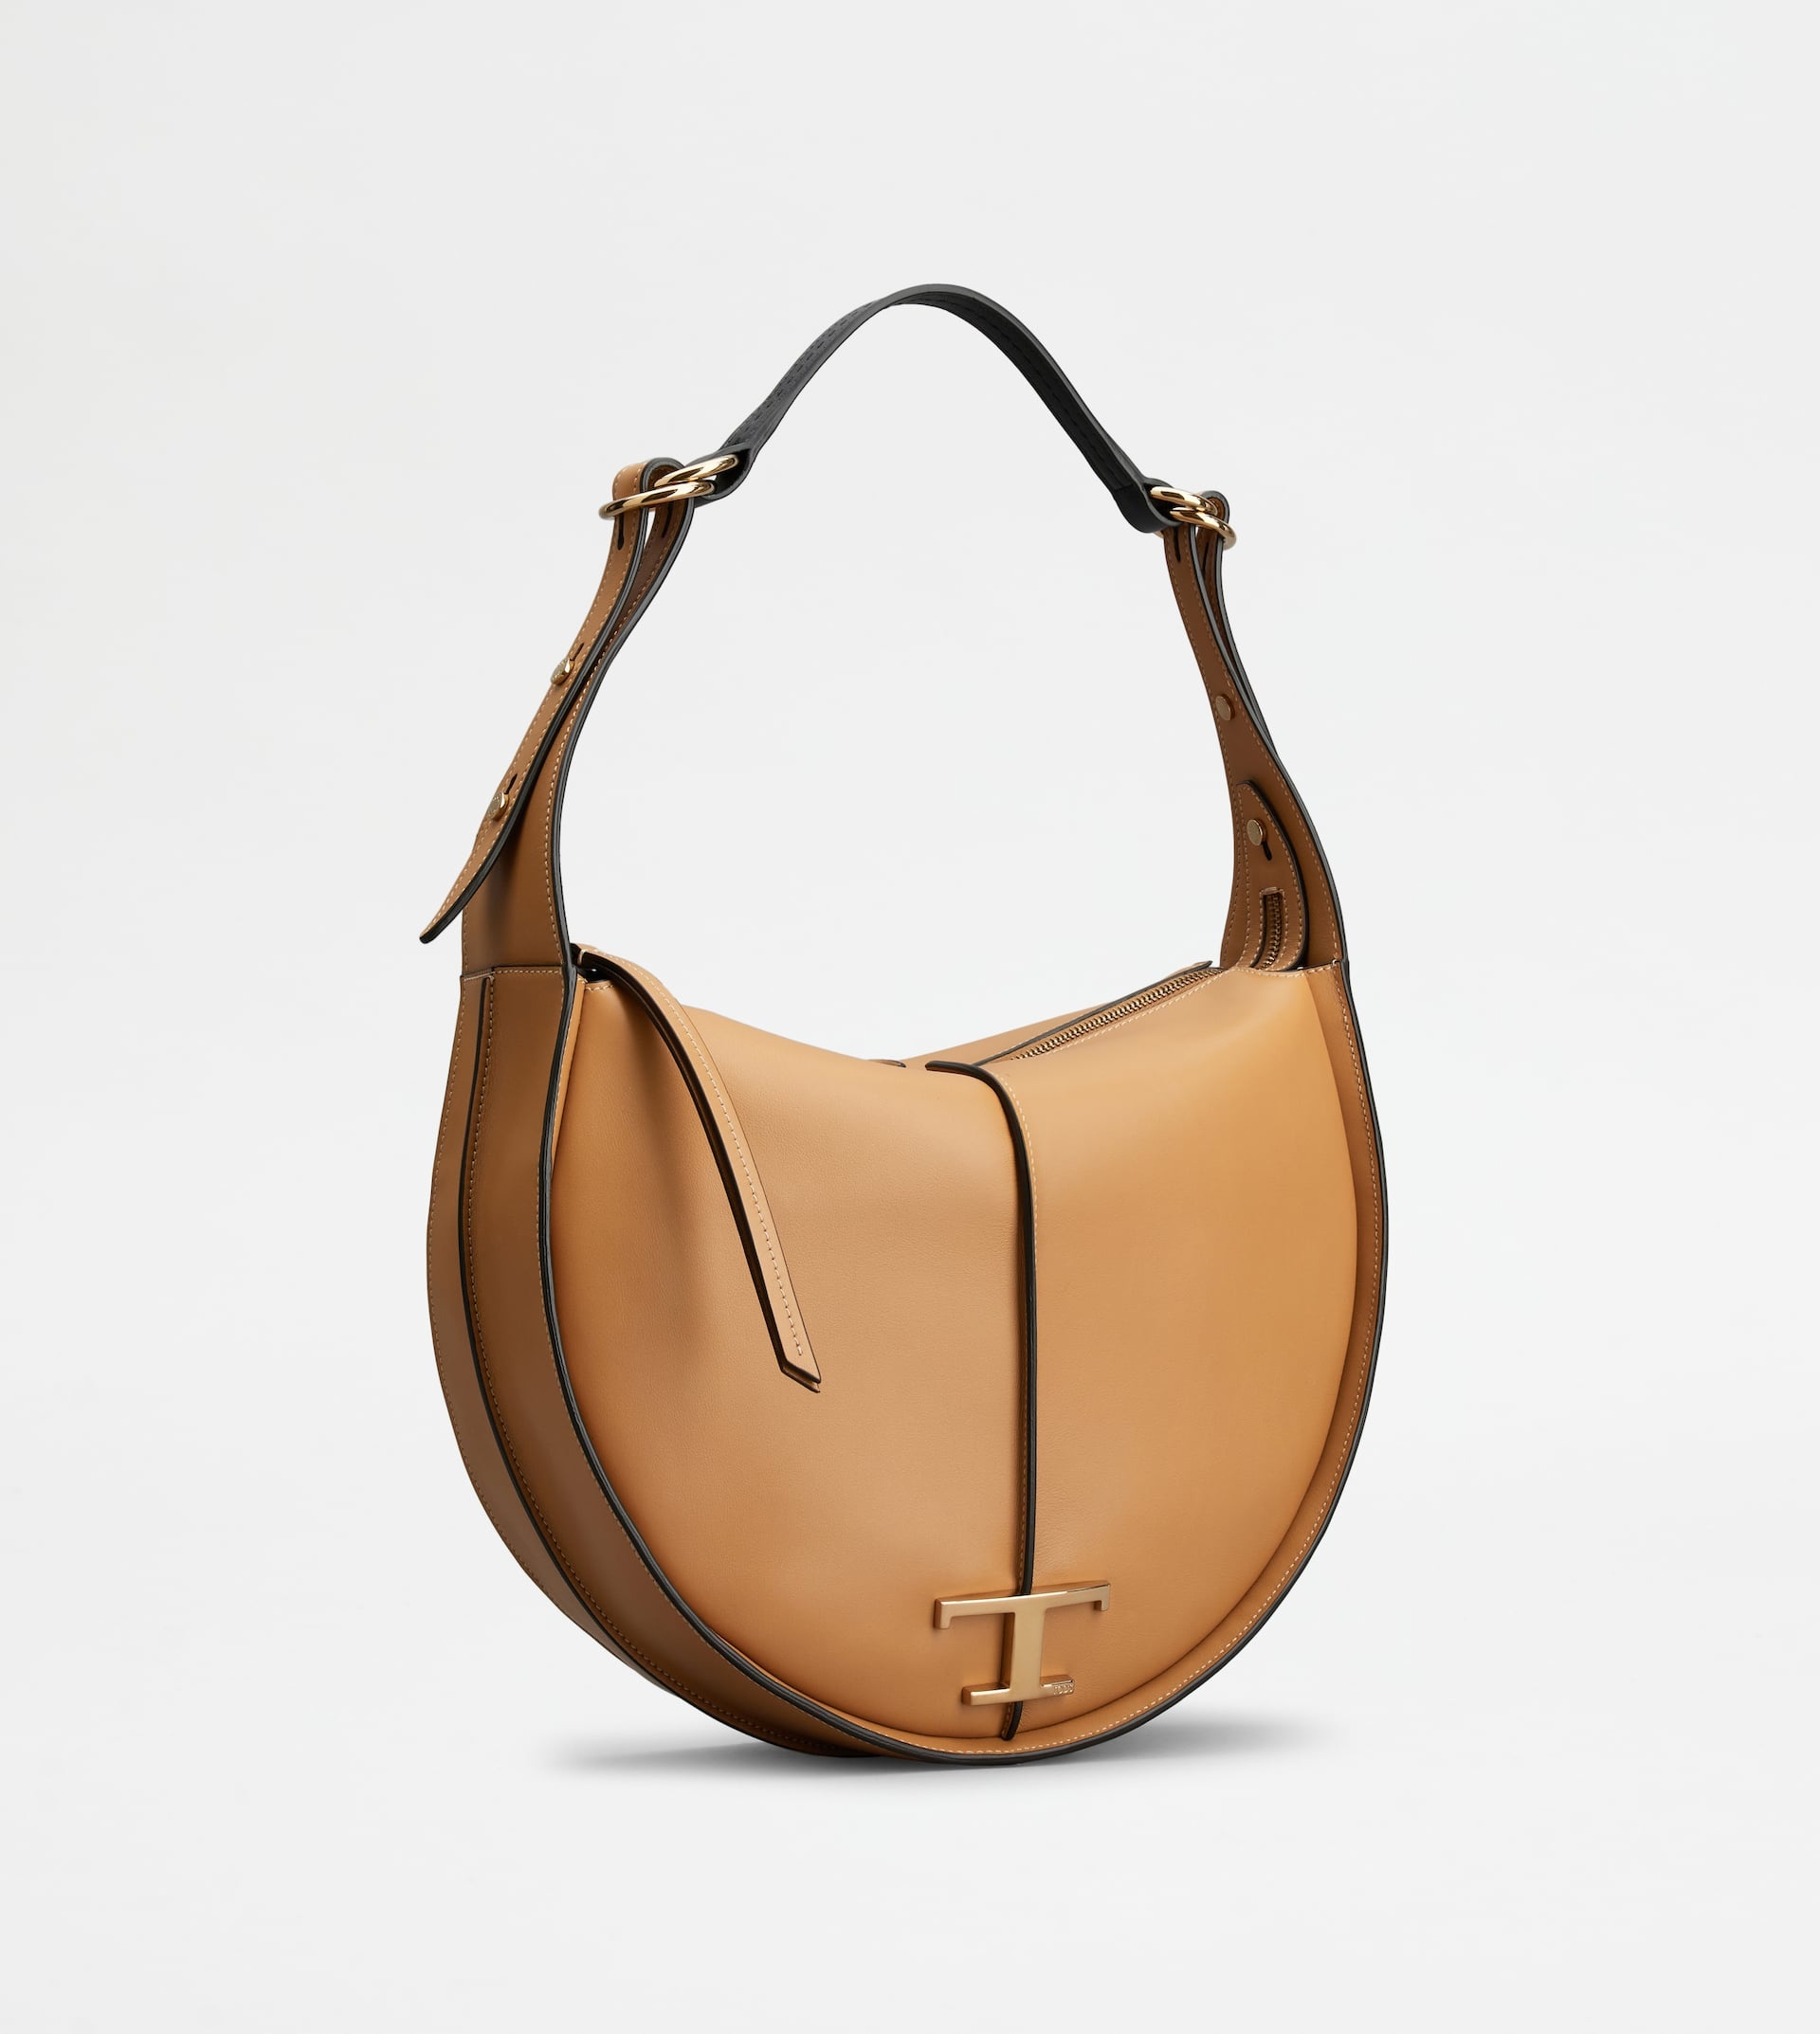 T TIMELESS HOBO BAG IN LEATHER MEDIUM - BROWN - 4